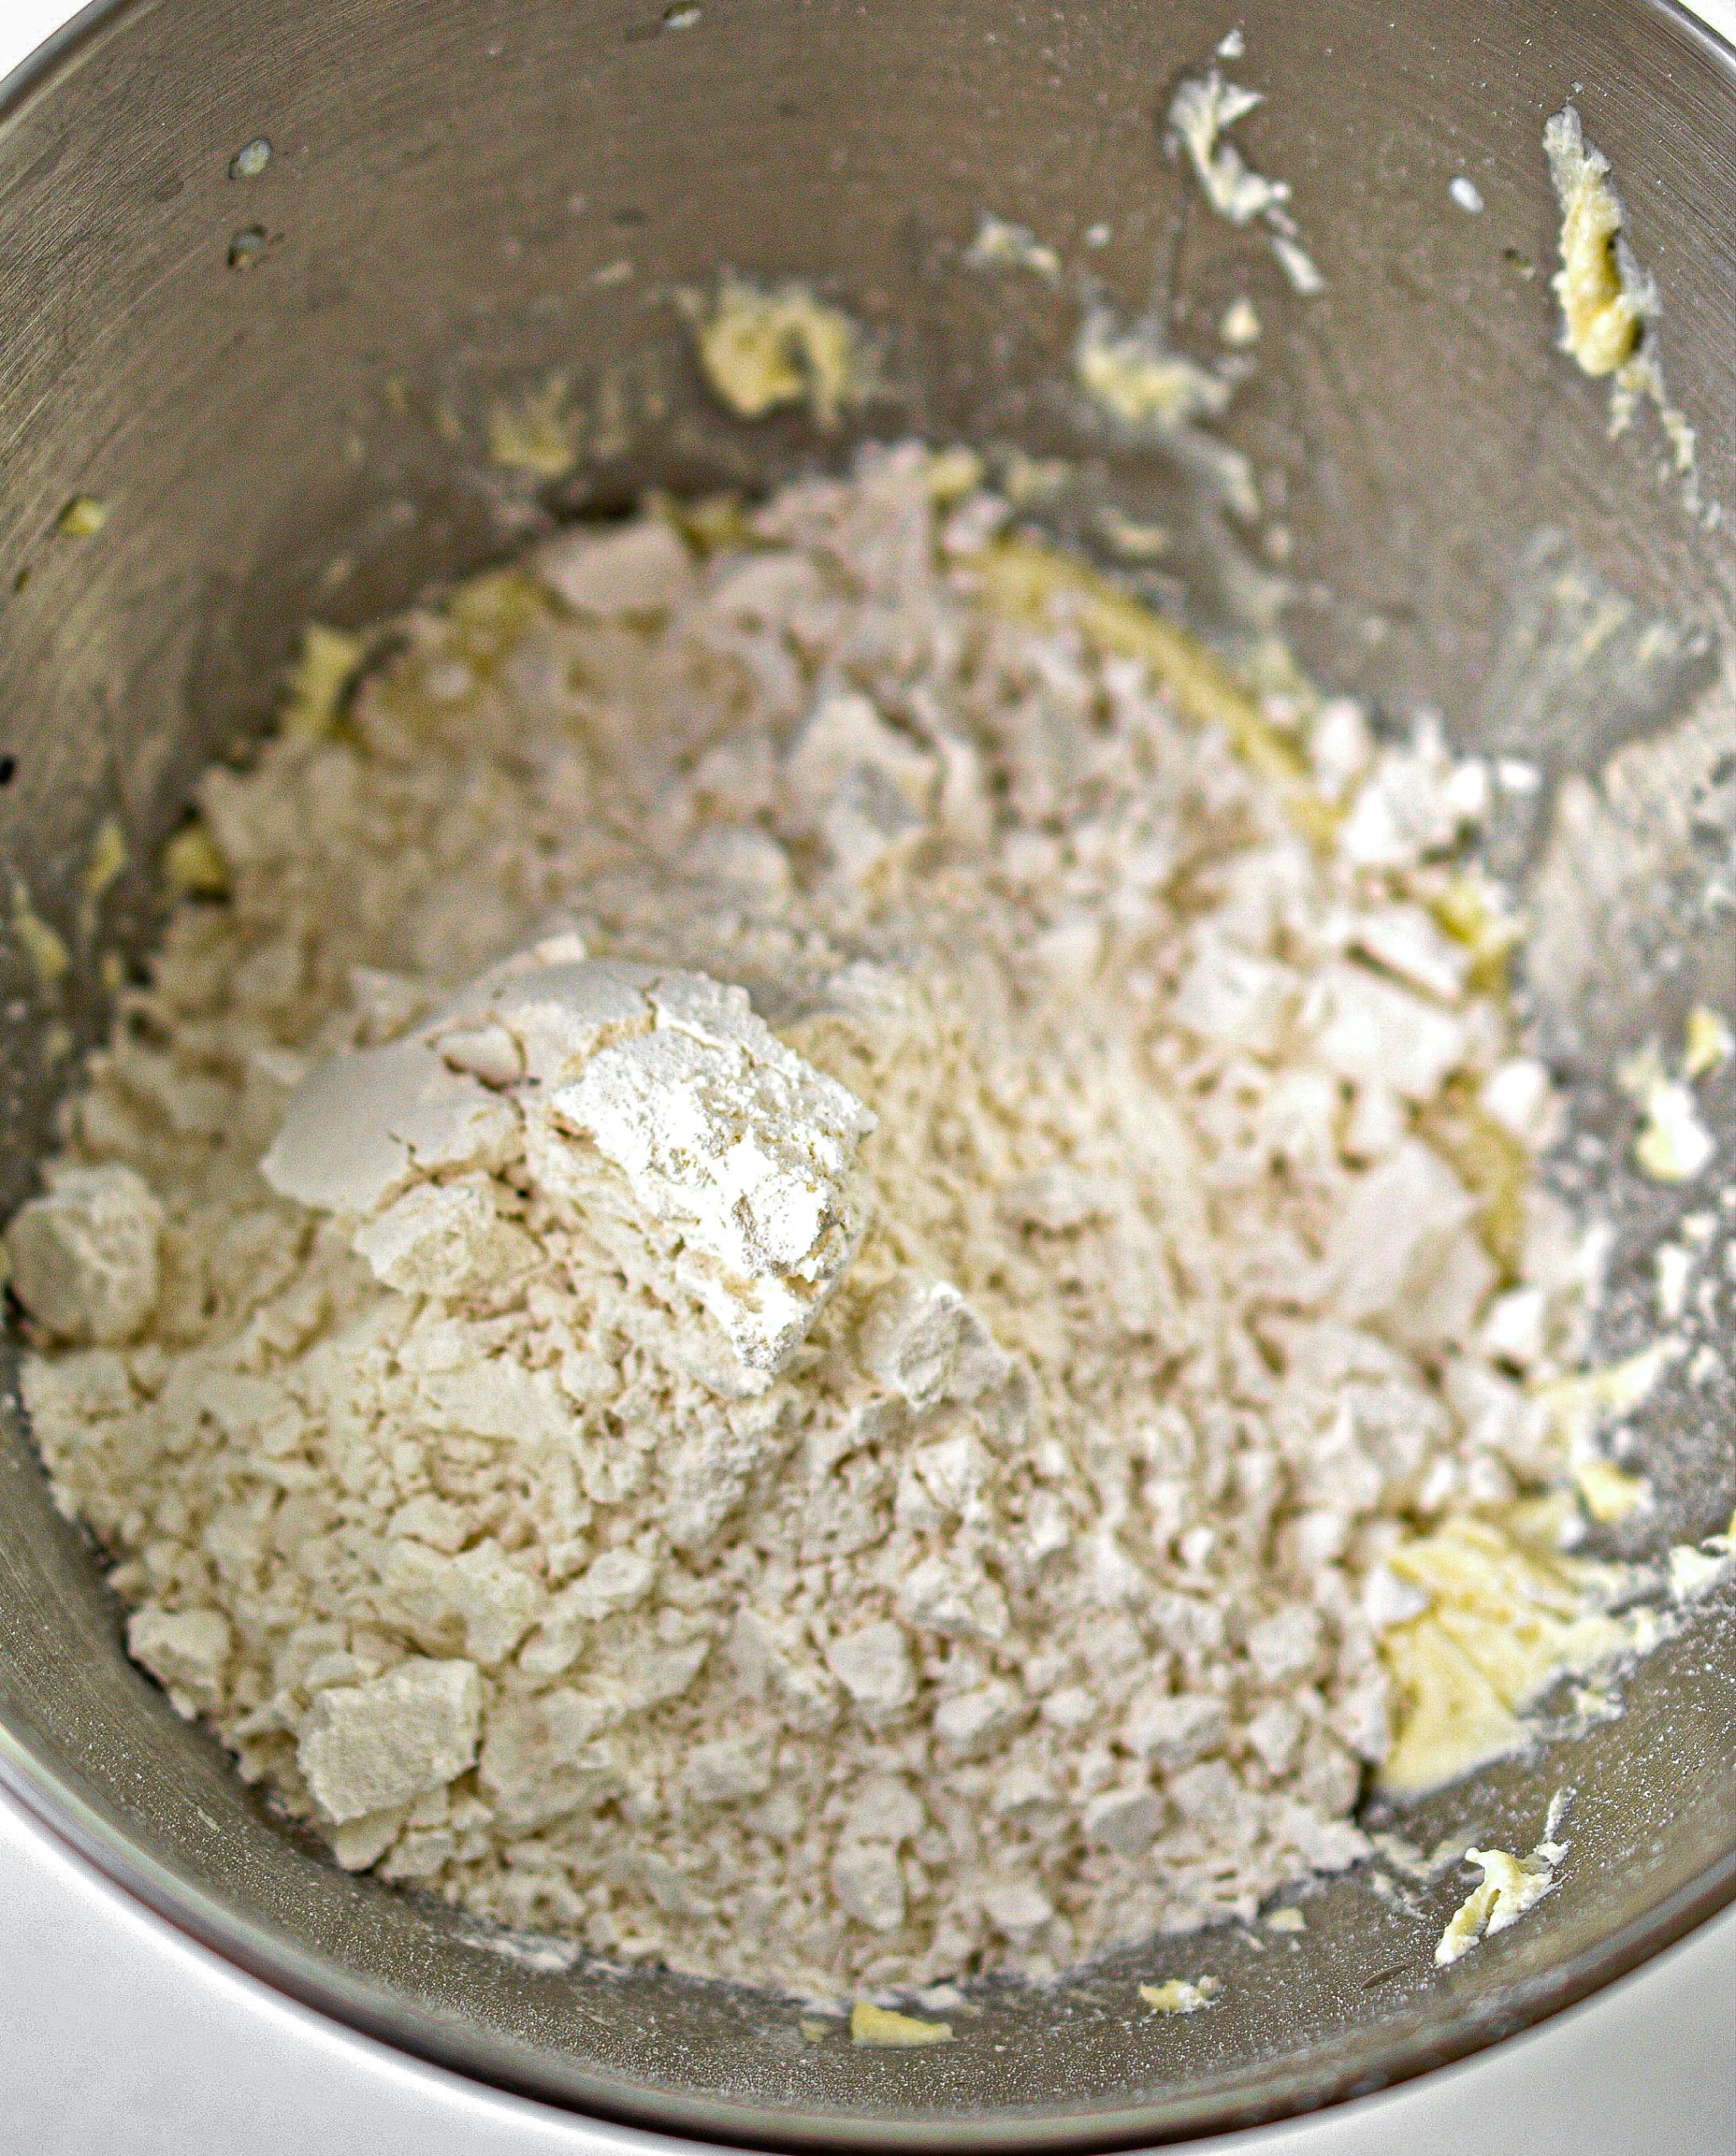  Mix the flour and salt together in a bowl.